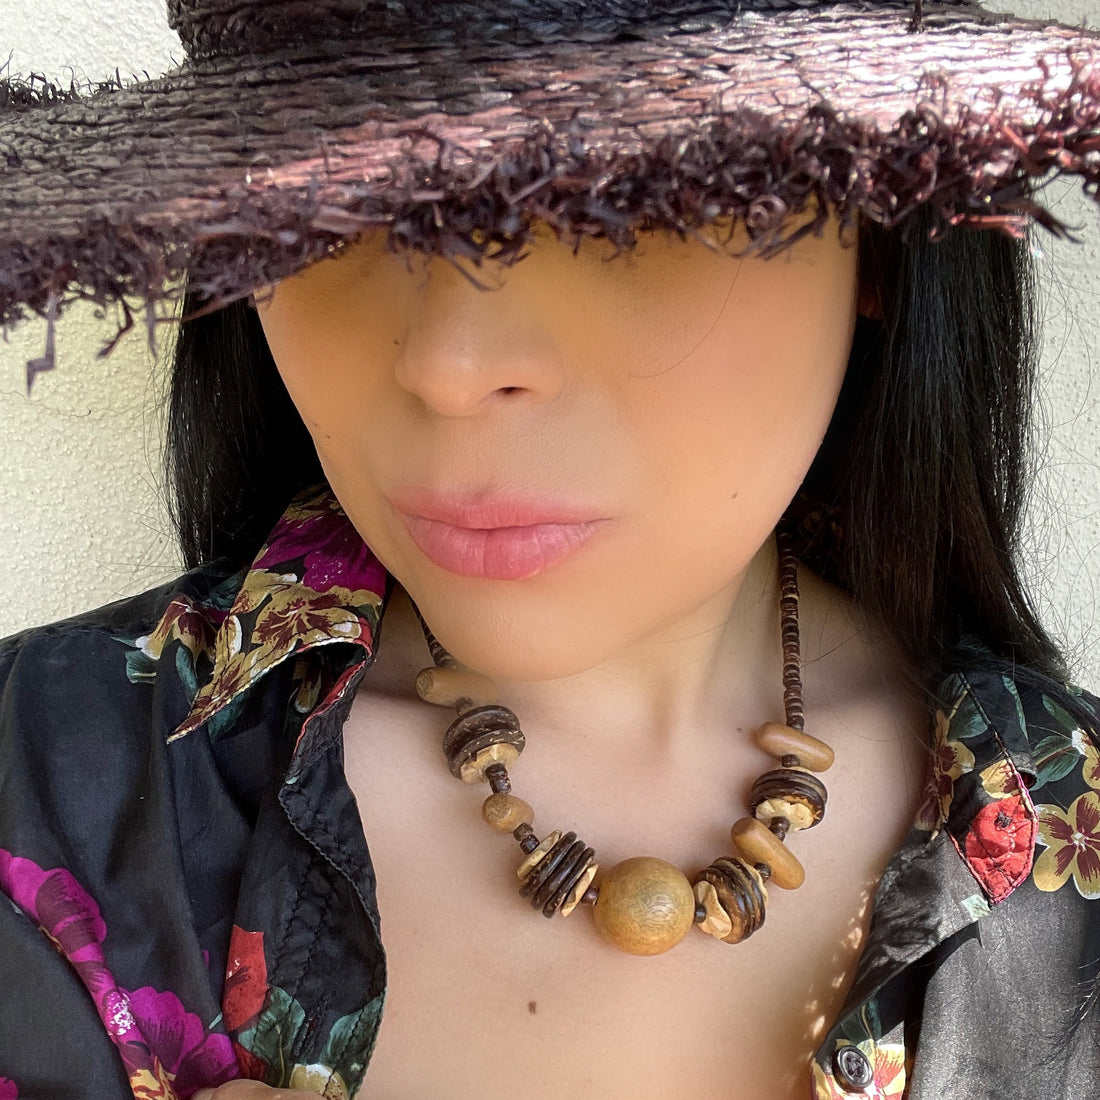 A vintage 1970s wooden bead necklace being worn with a floral shirt and woven hat